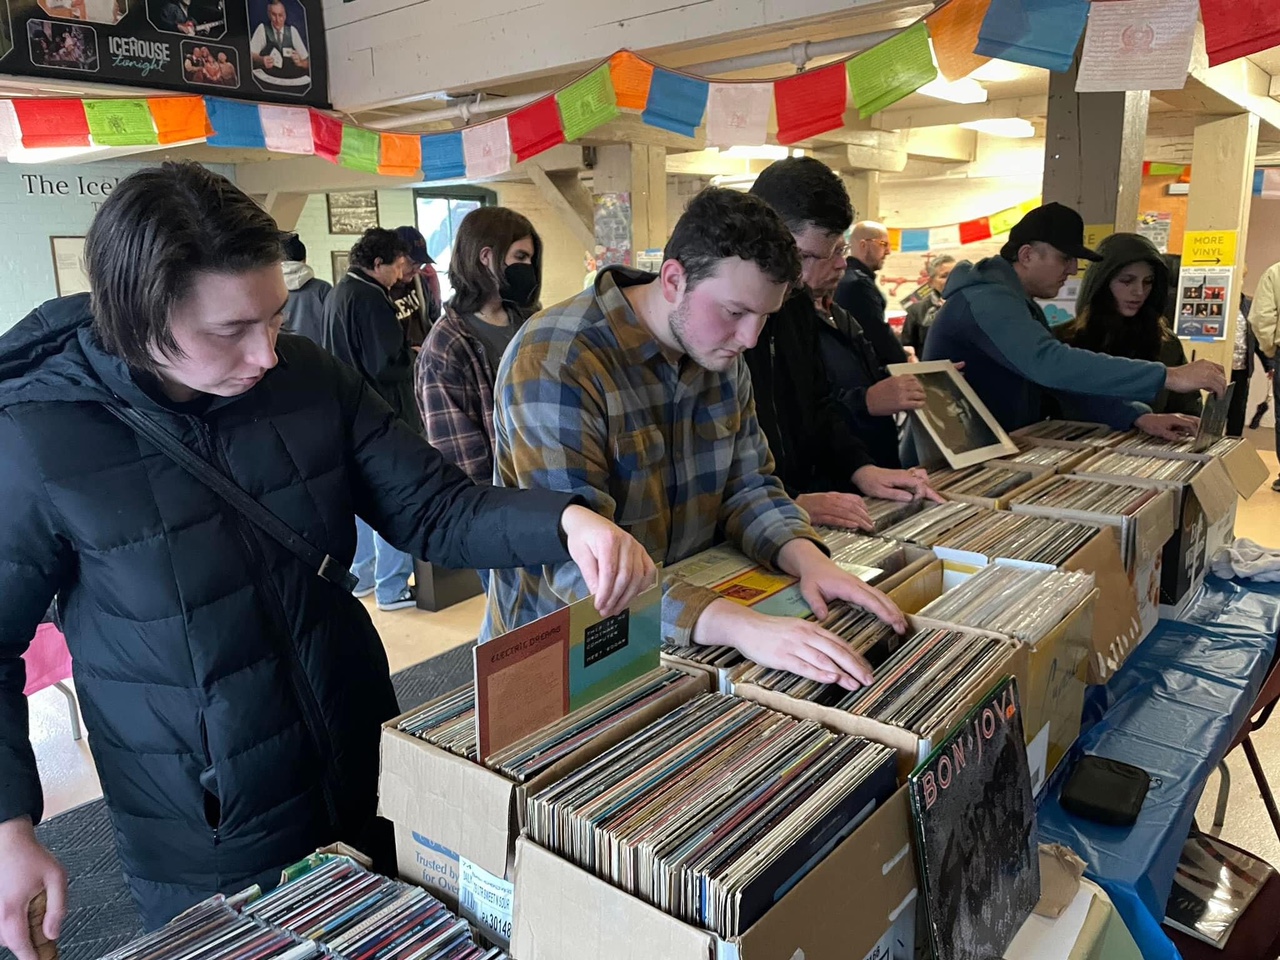 Lehigh Valley Community members browse Vinyl records at Lisa Bodnar and Whistlegrass OM FROM THE VINYL GARDEN event at the Icehouse in Bethlehem